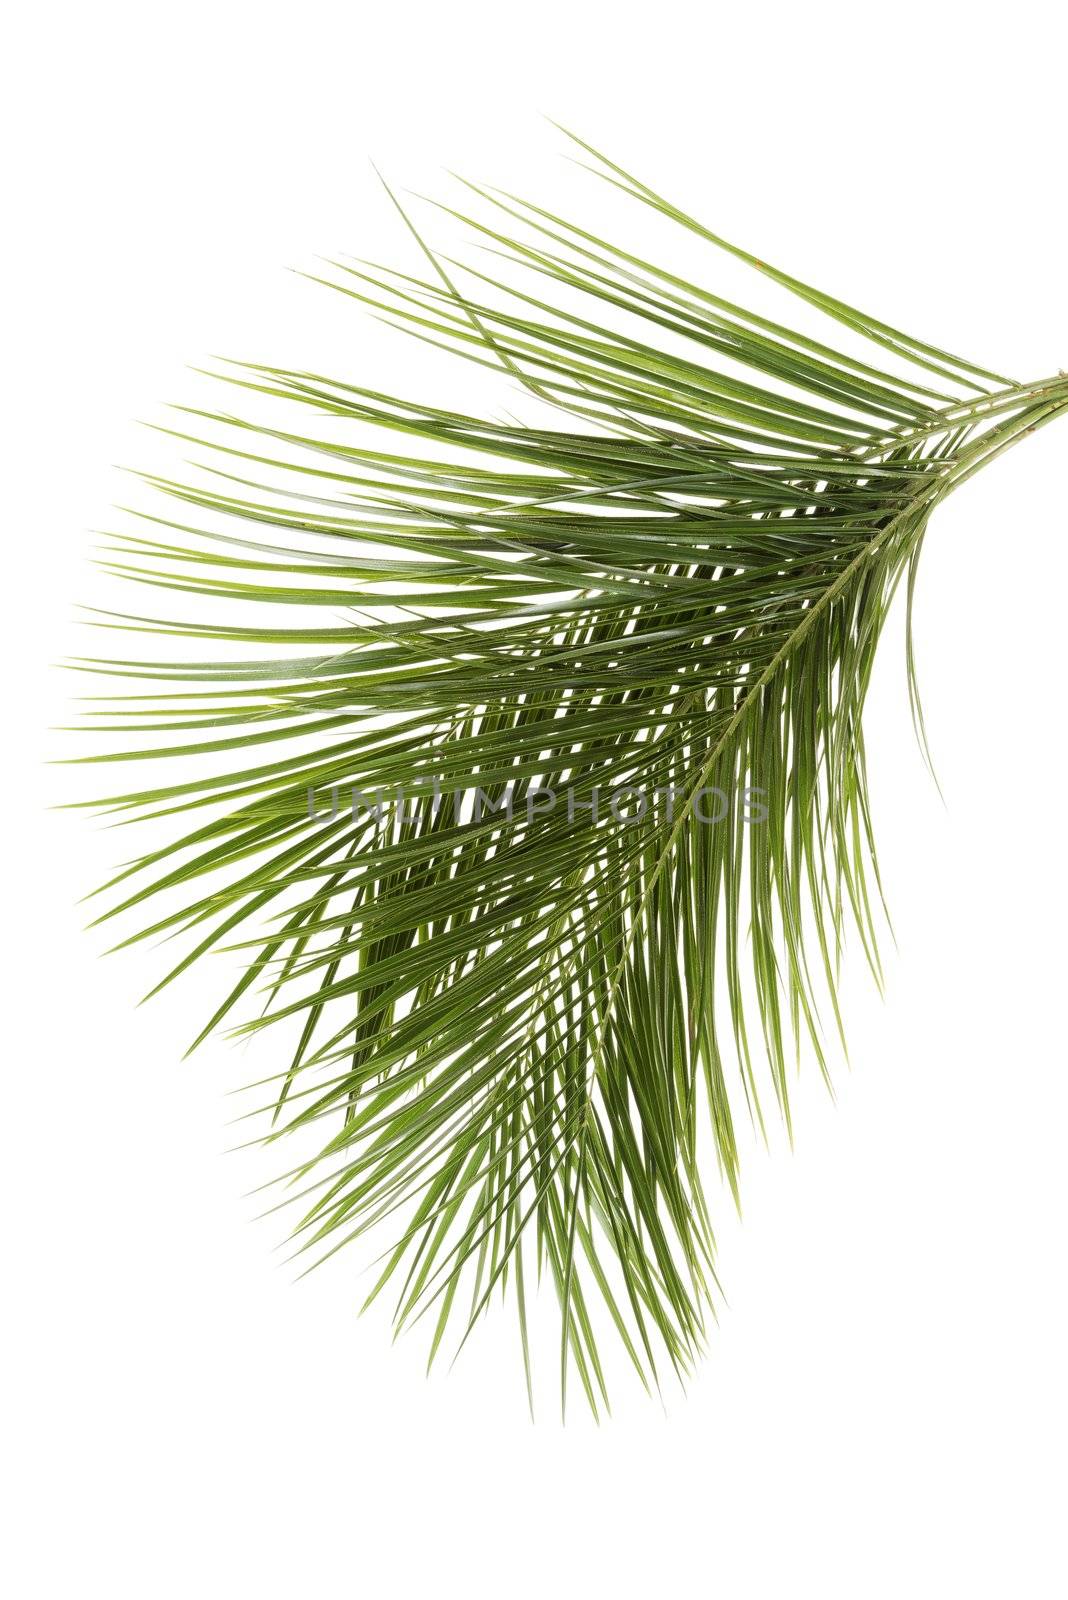 Leaves of palm tree. Isolated on white.